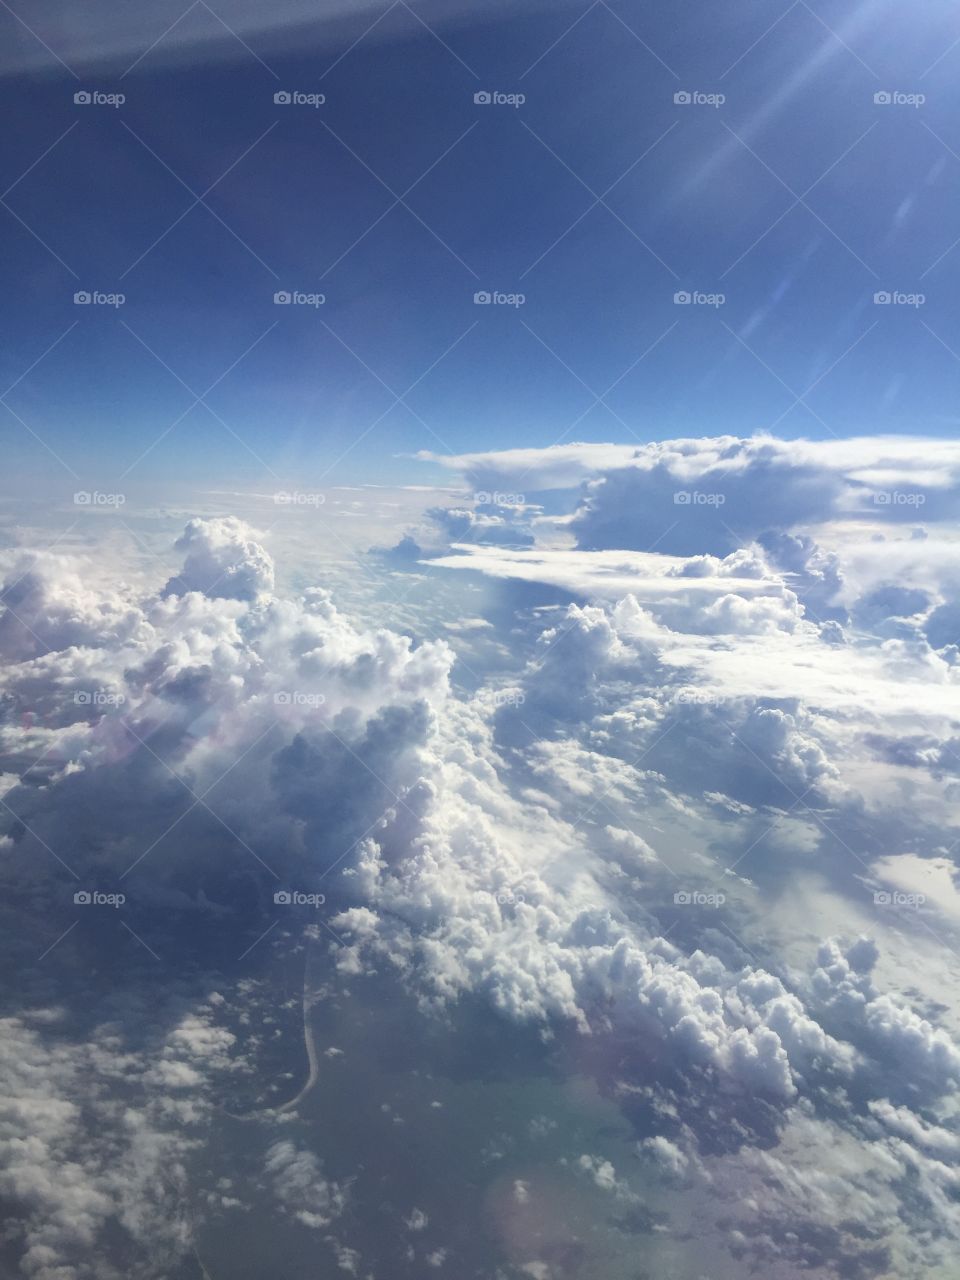 Billowy white cloud formations in the sky, view from airplane 